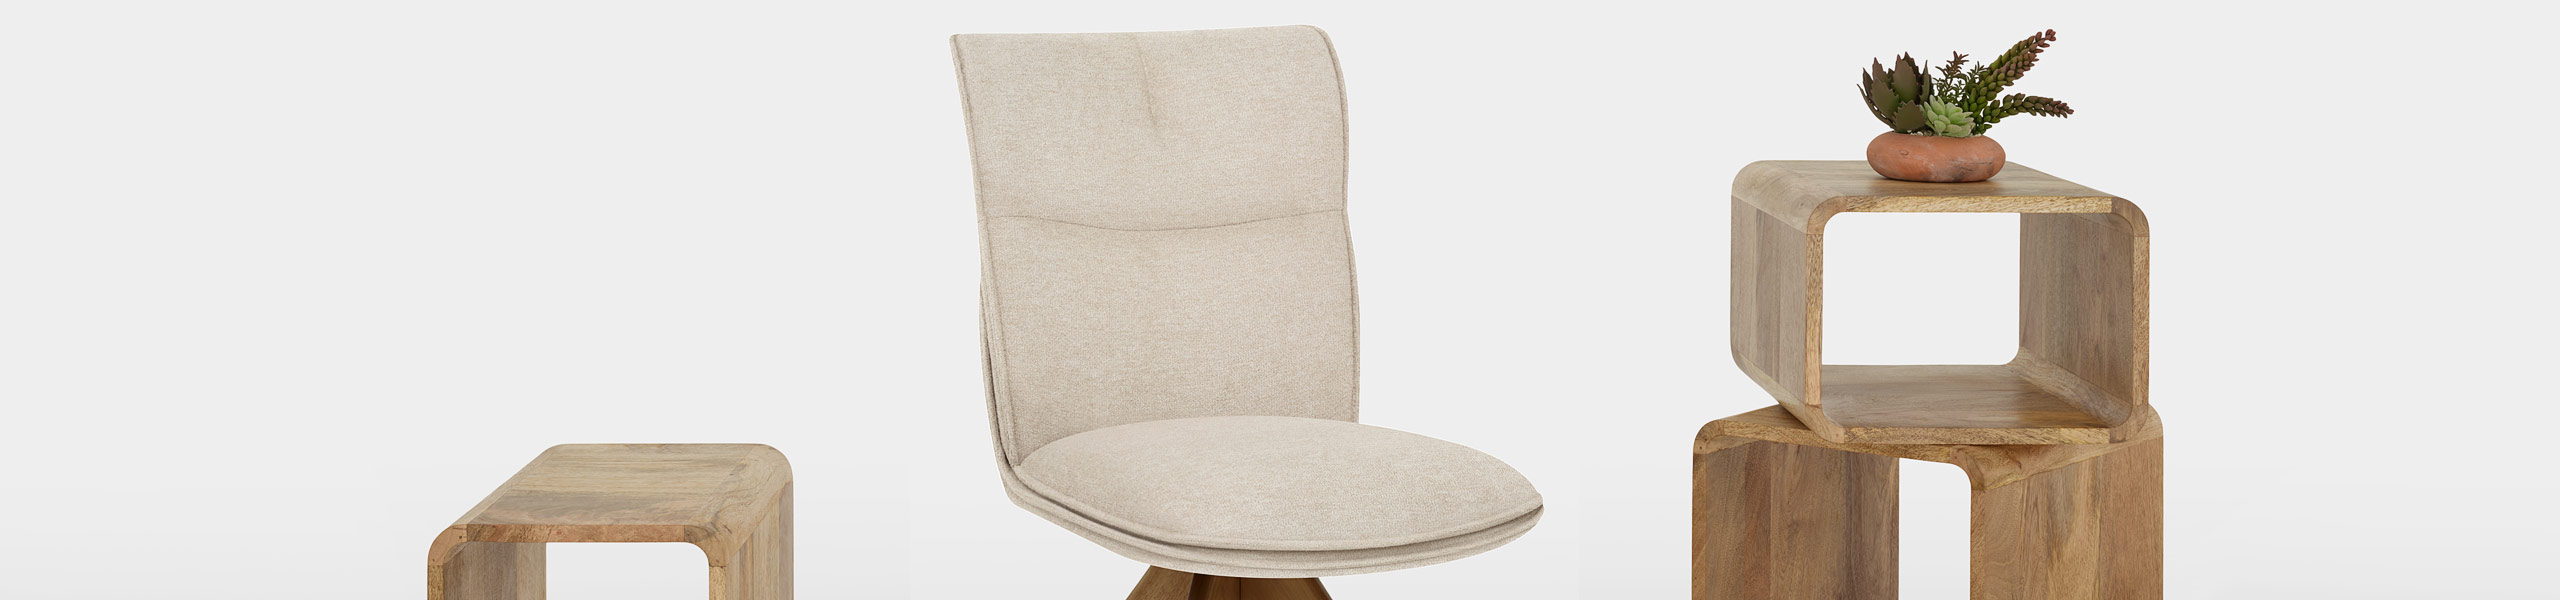 Cody Wooden Dining Chair Beige Fabric Video Banner